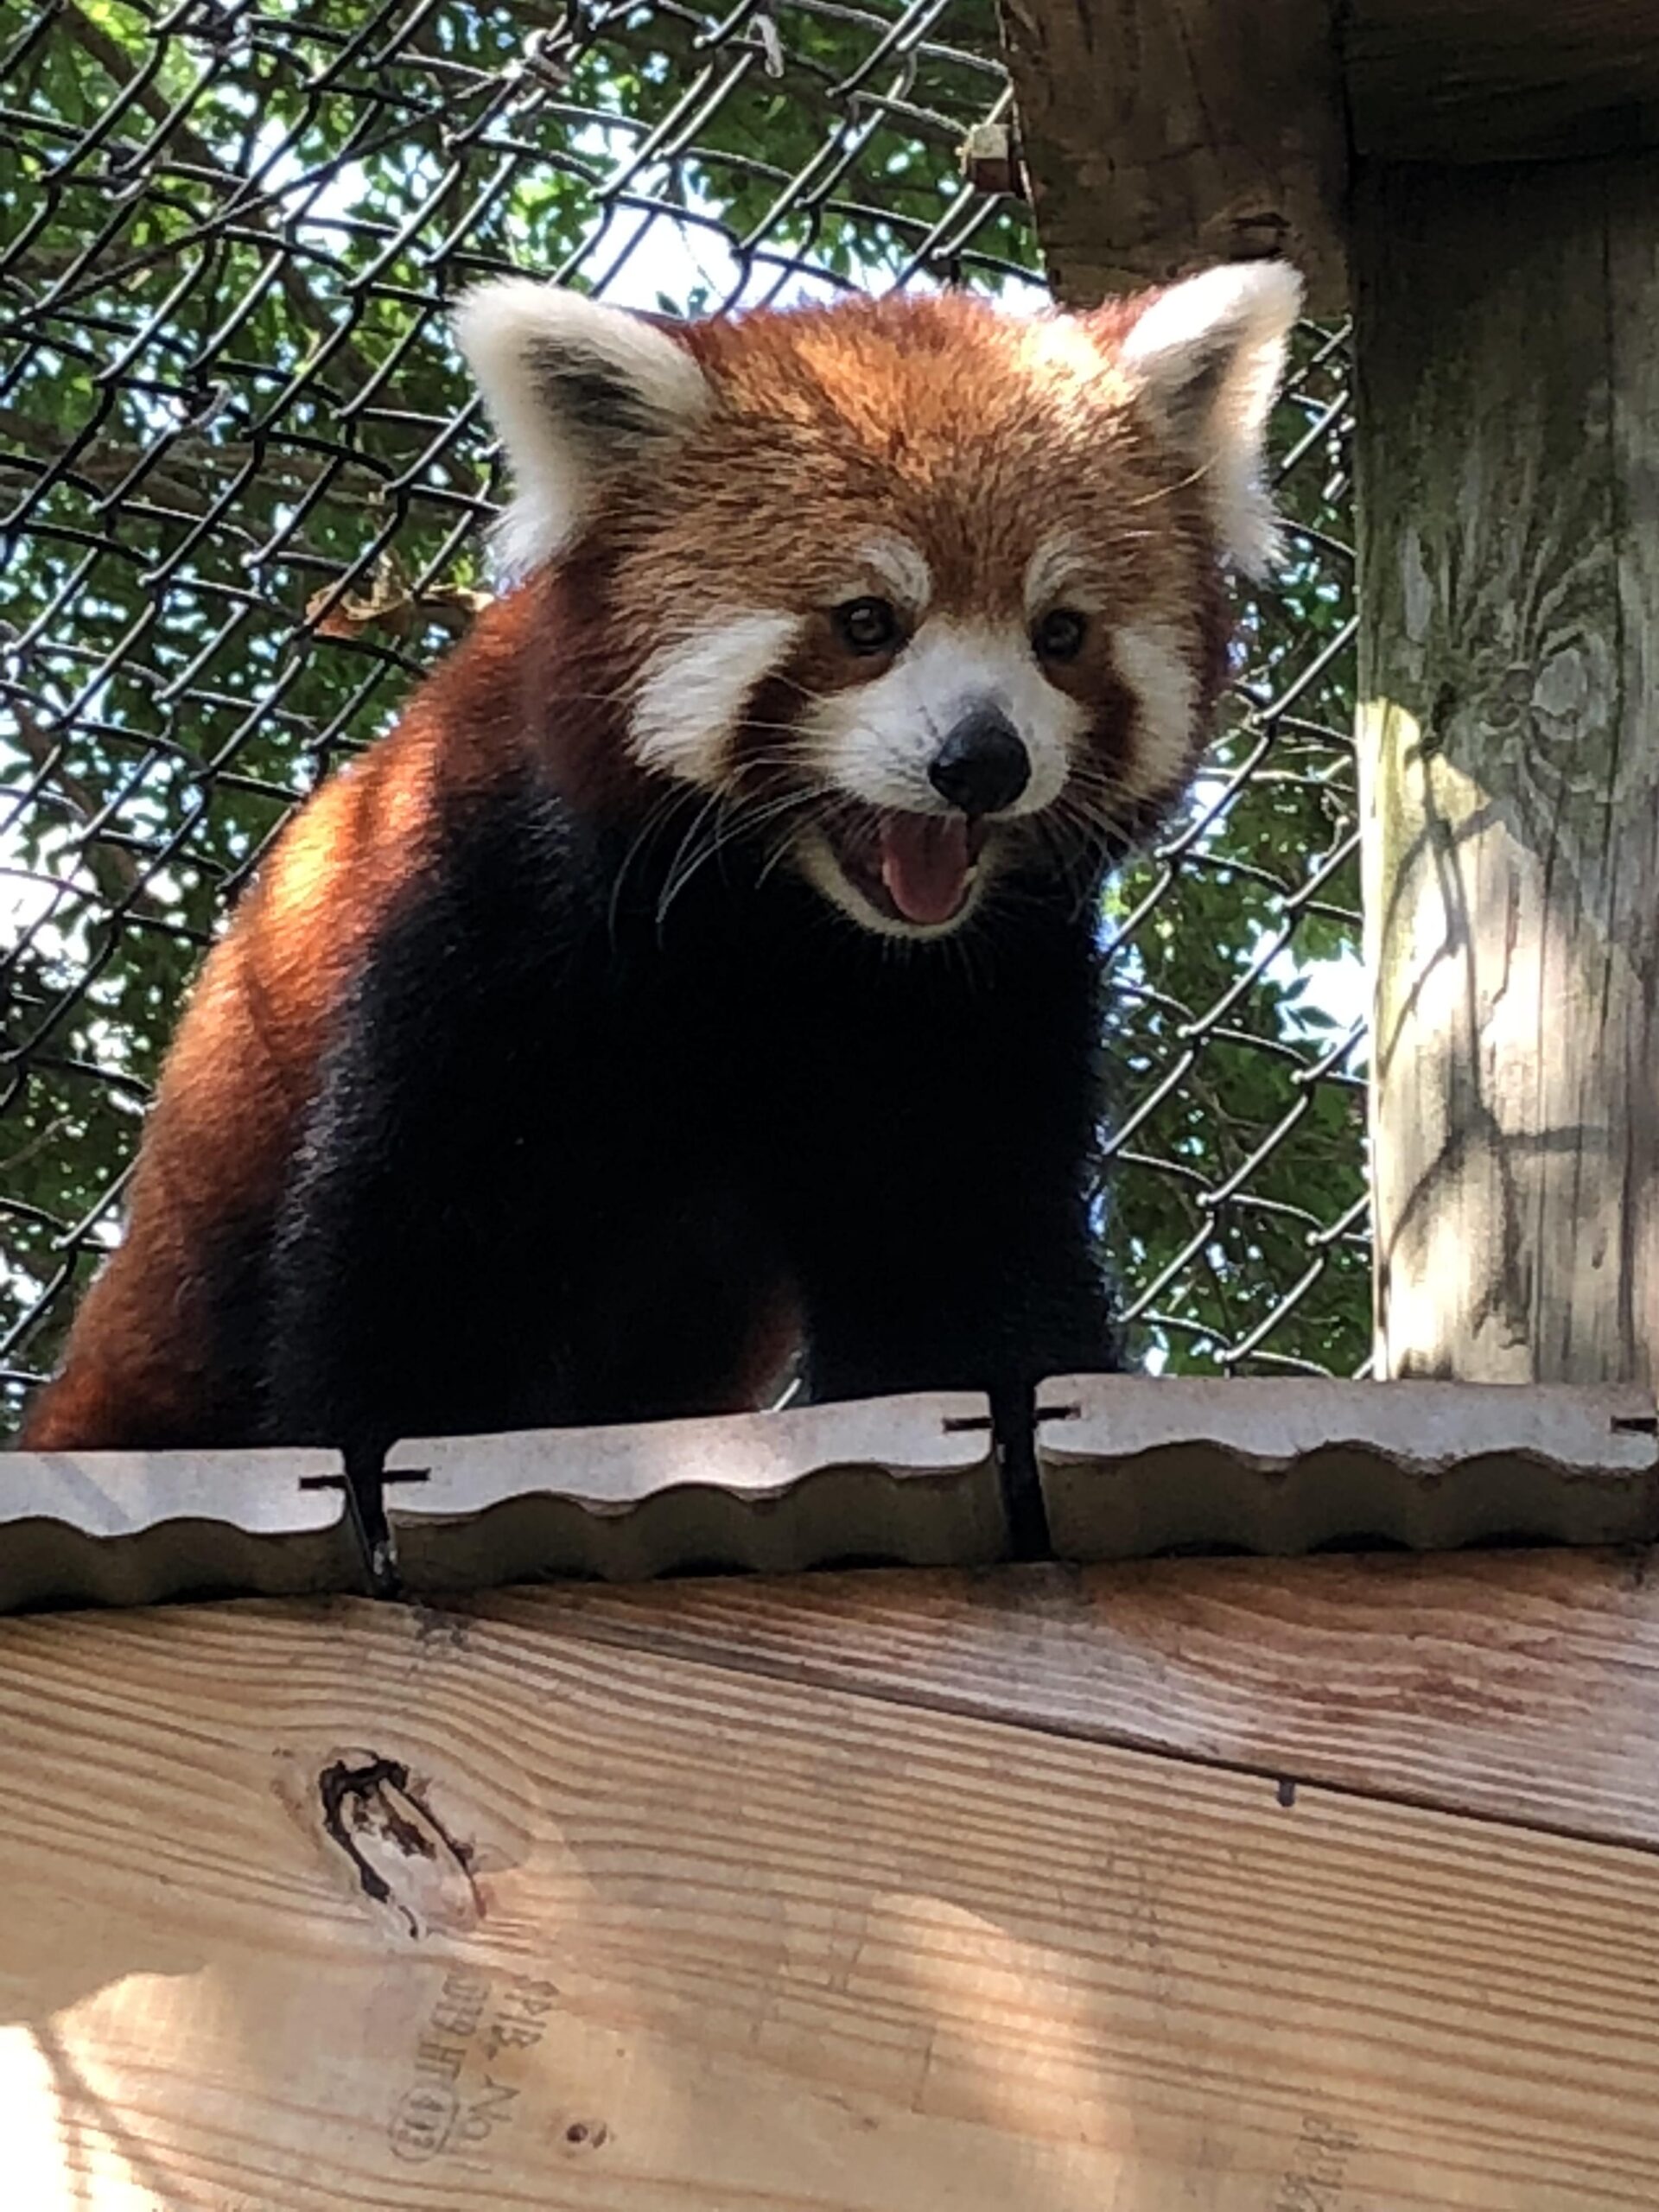 Excited red panda with open mouth